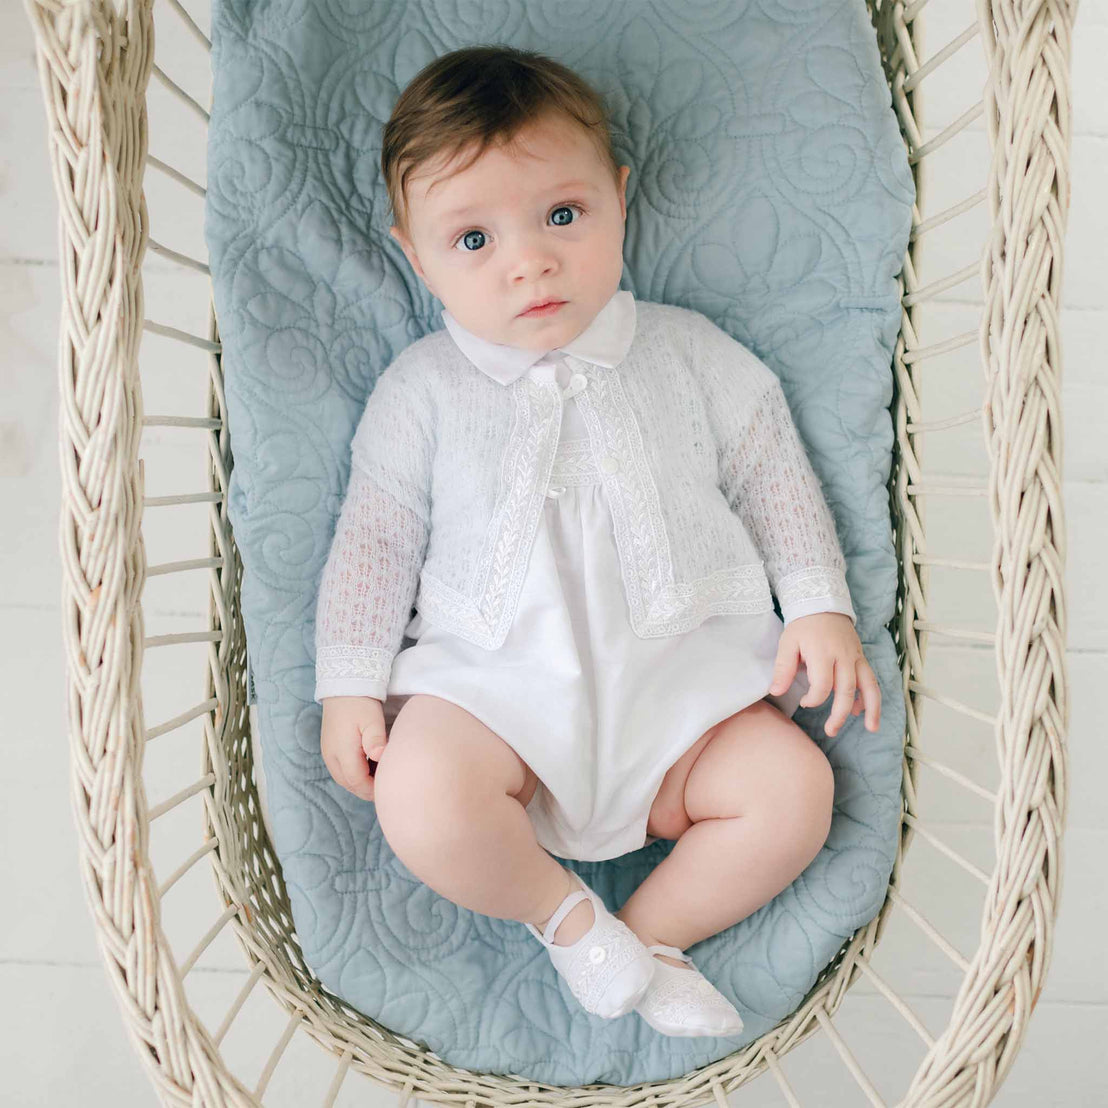 A baby with blue eyes and sandy brown hair wearing a white outfit and an Oliver Knit Sweater is lying down in a wicker basket on top of a quilted light blue blanket, looking up at the camera. One of the baby's legs is slightly bent.